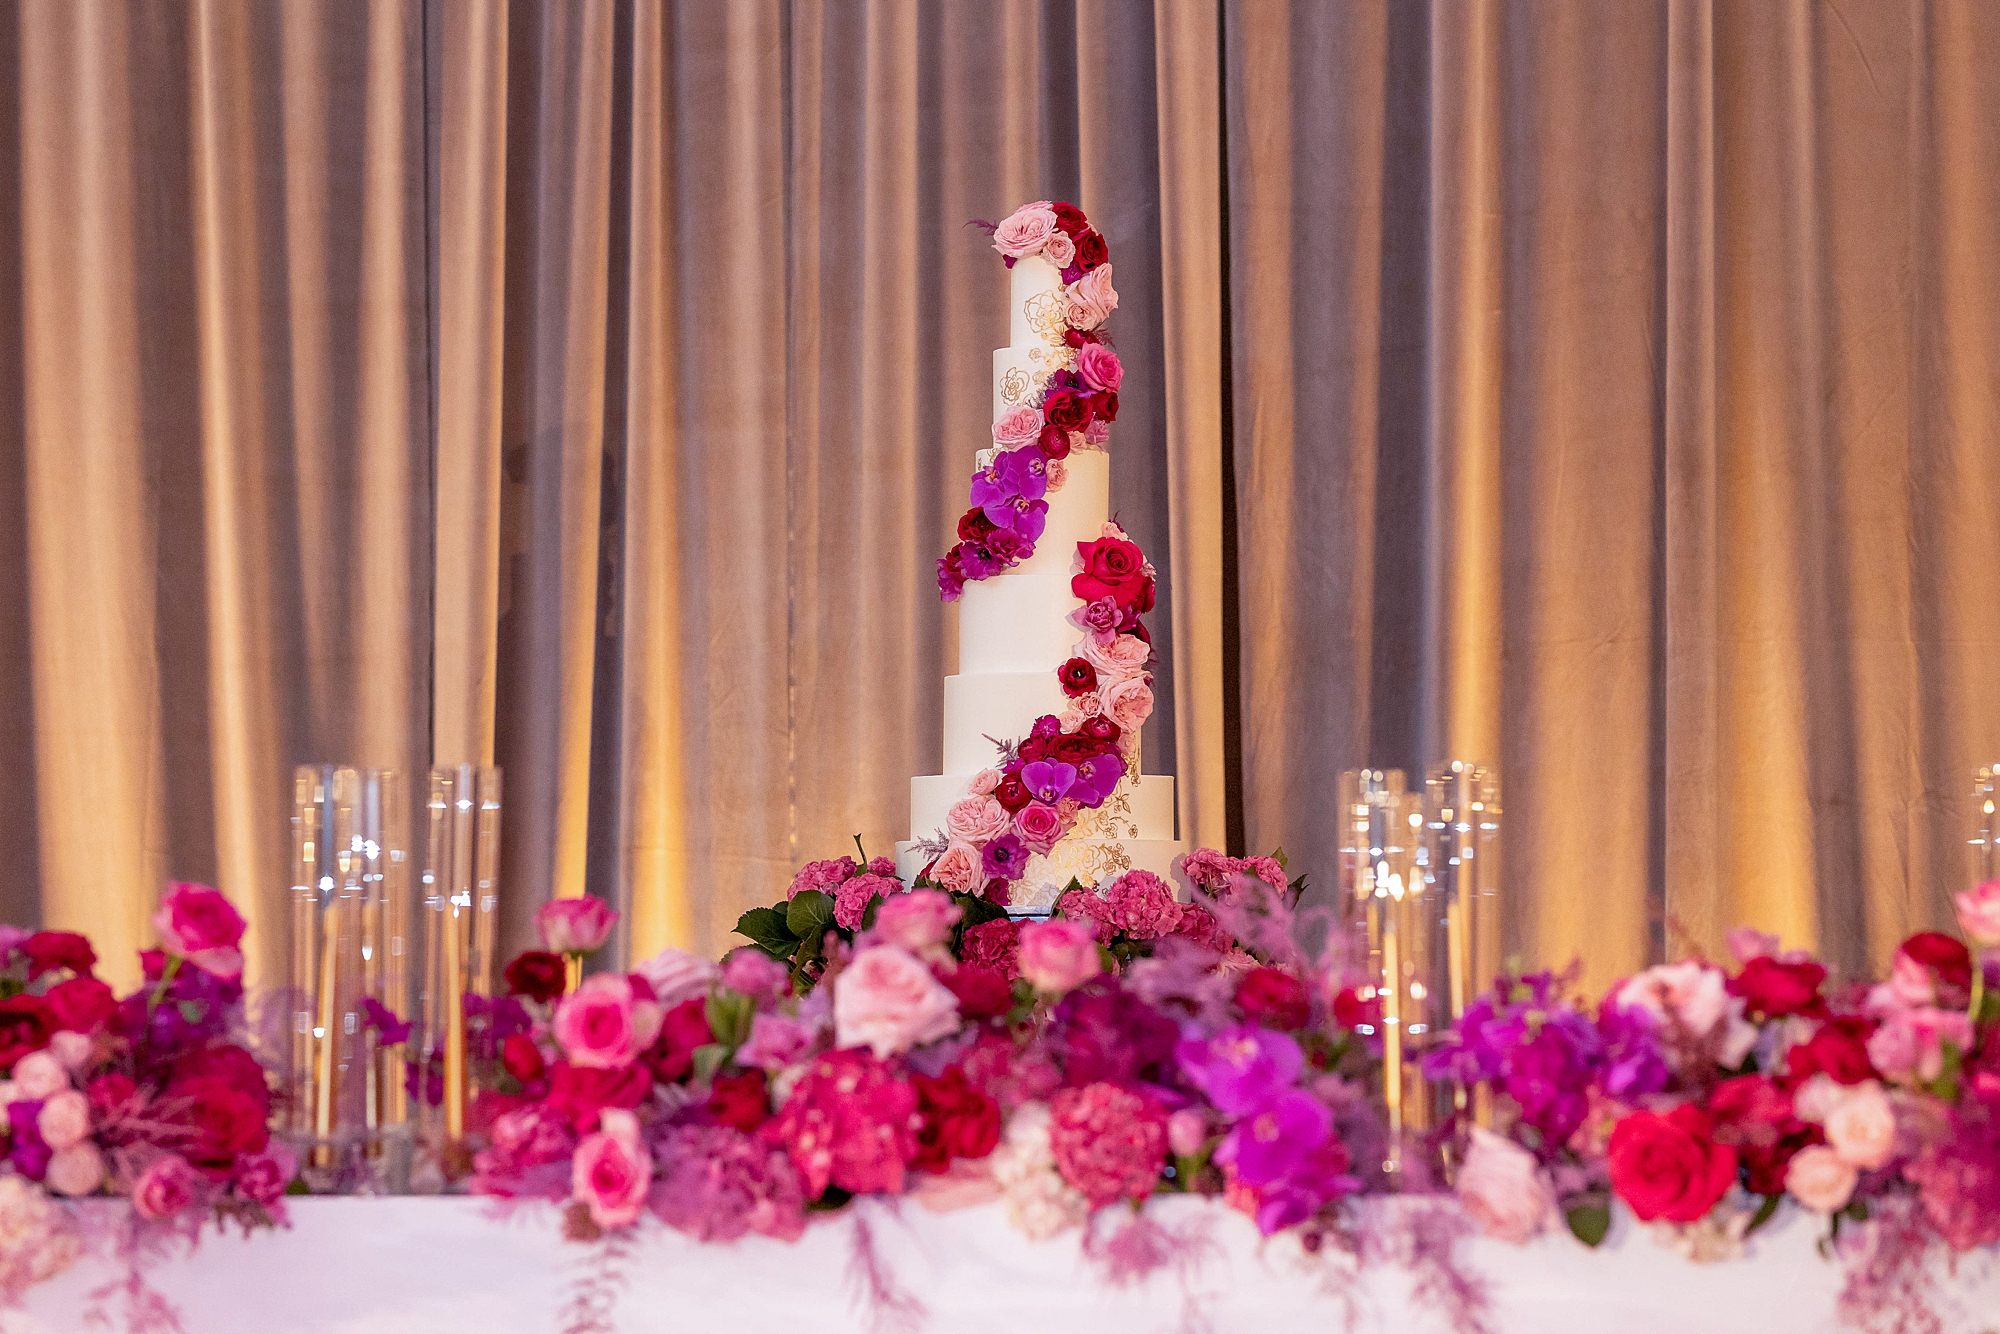 tiered wedding cake with pink flowers winding around the tiers 